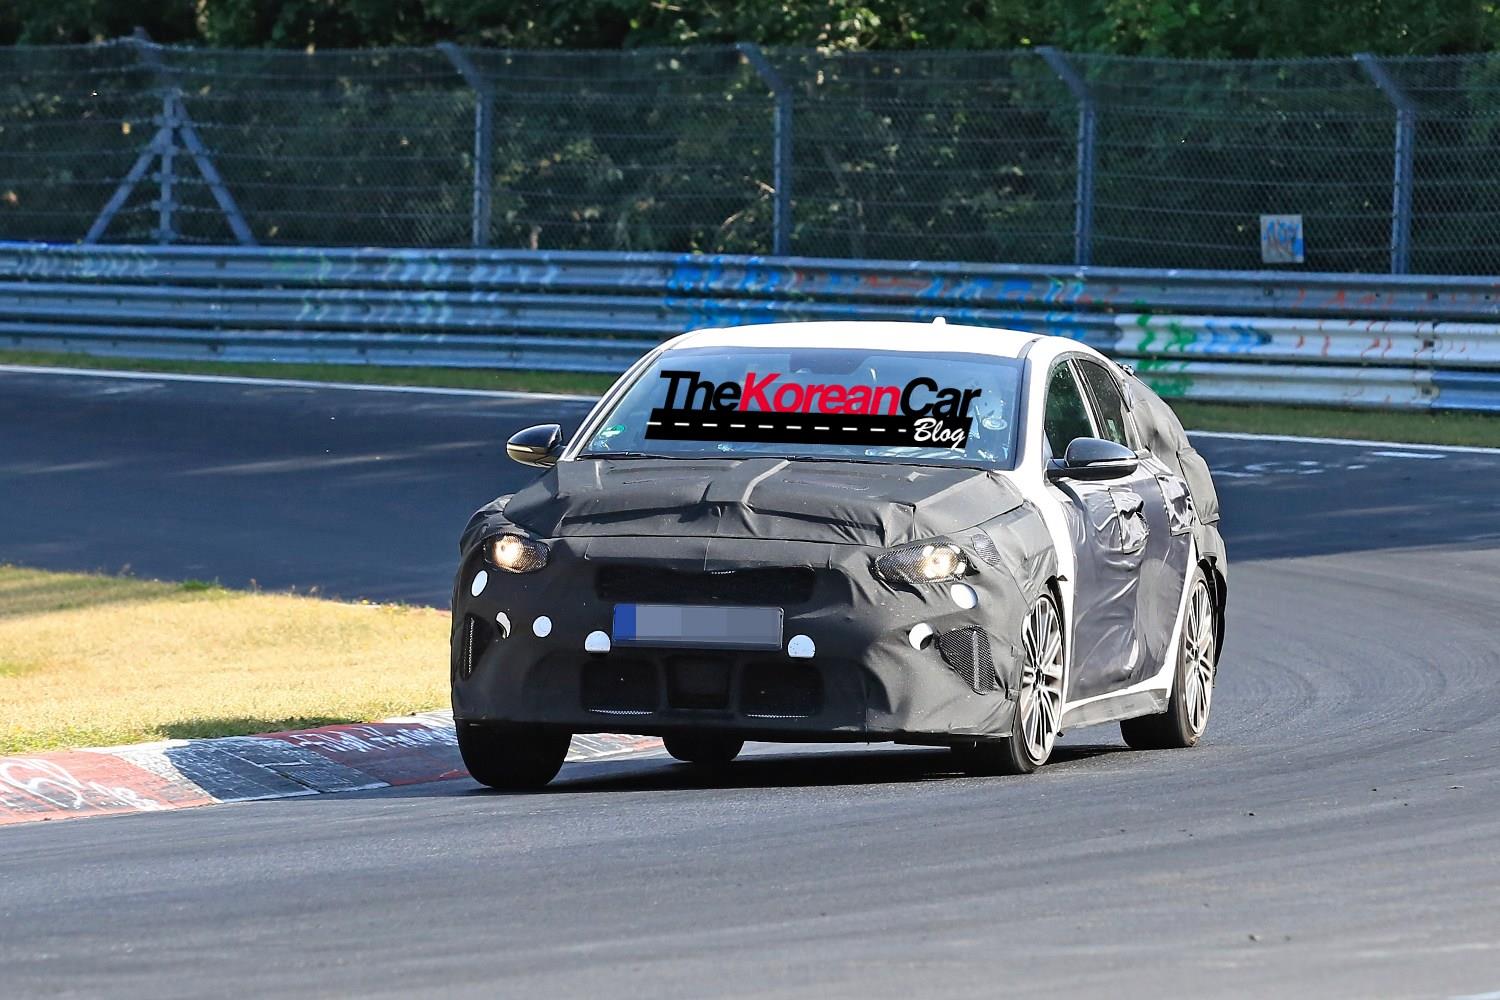 2019 Kia Proceed Brake GT: new photos from the Nurburgring test track